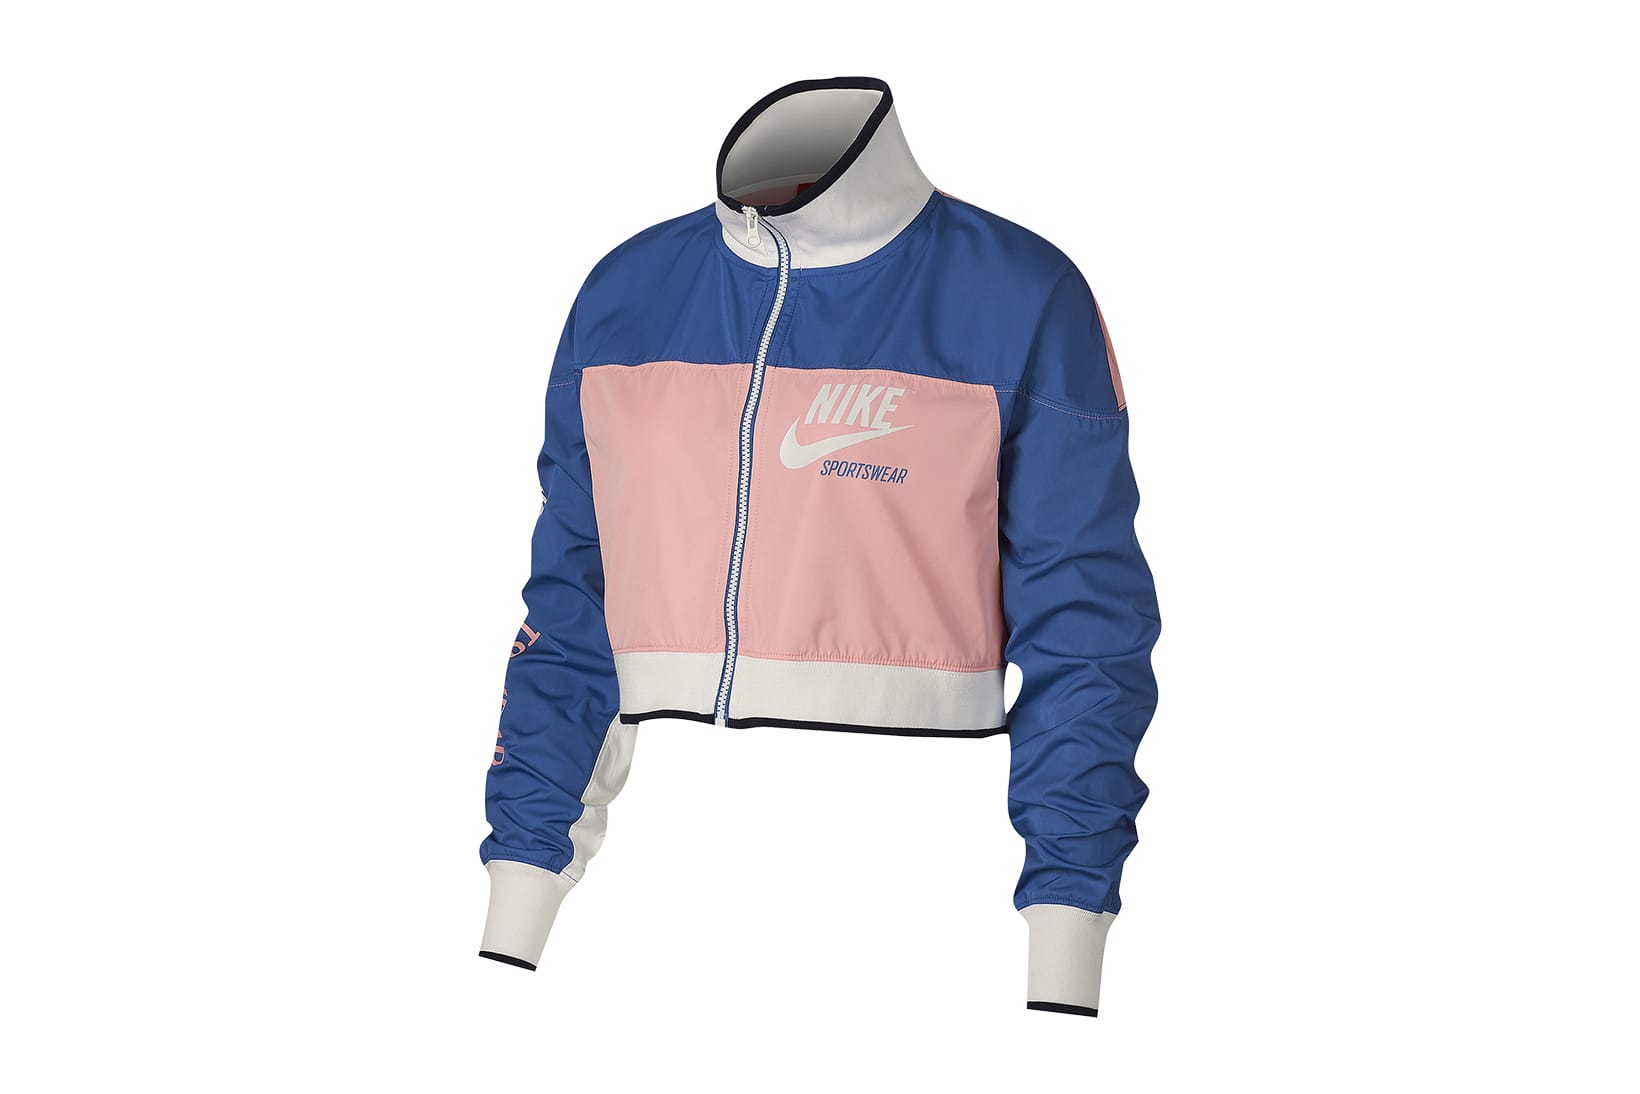 the dept of nike archive jacket